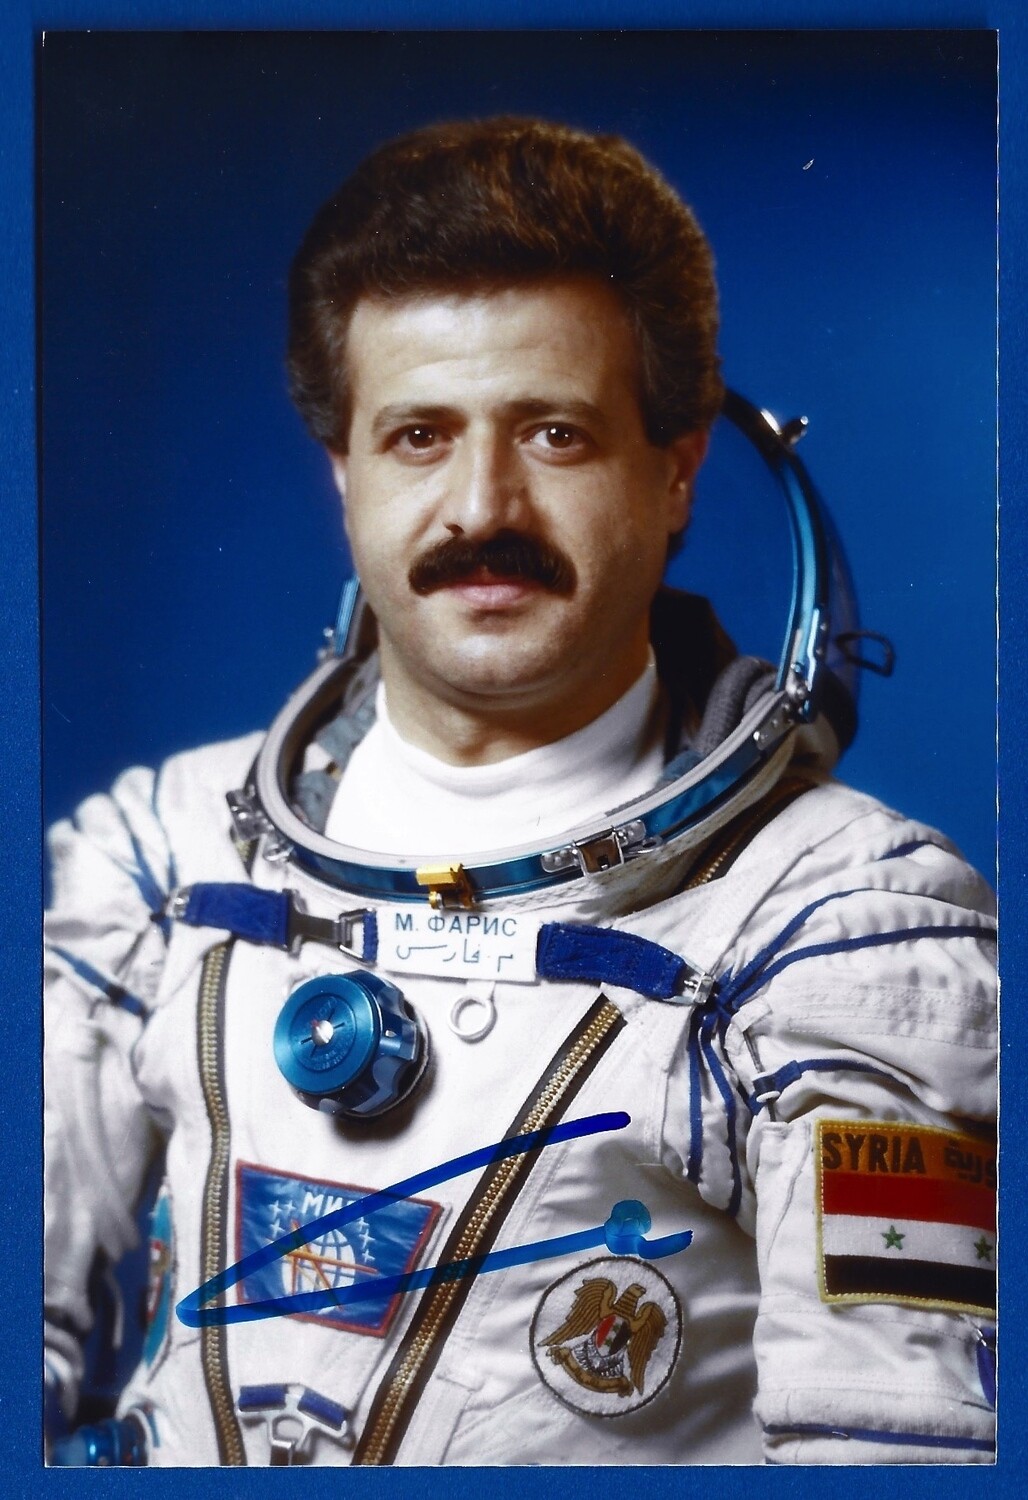 Muhammed Faris Syrian astronaut signed picture